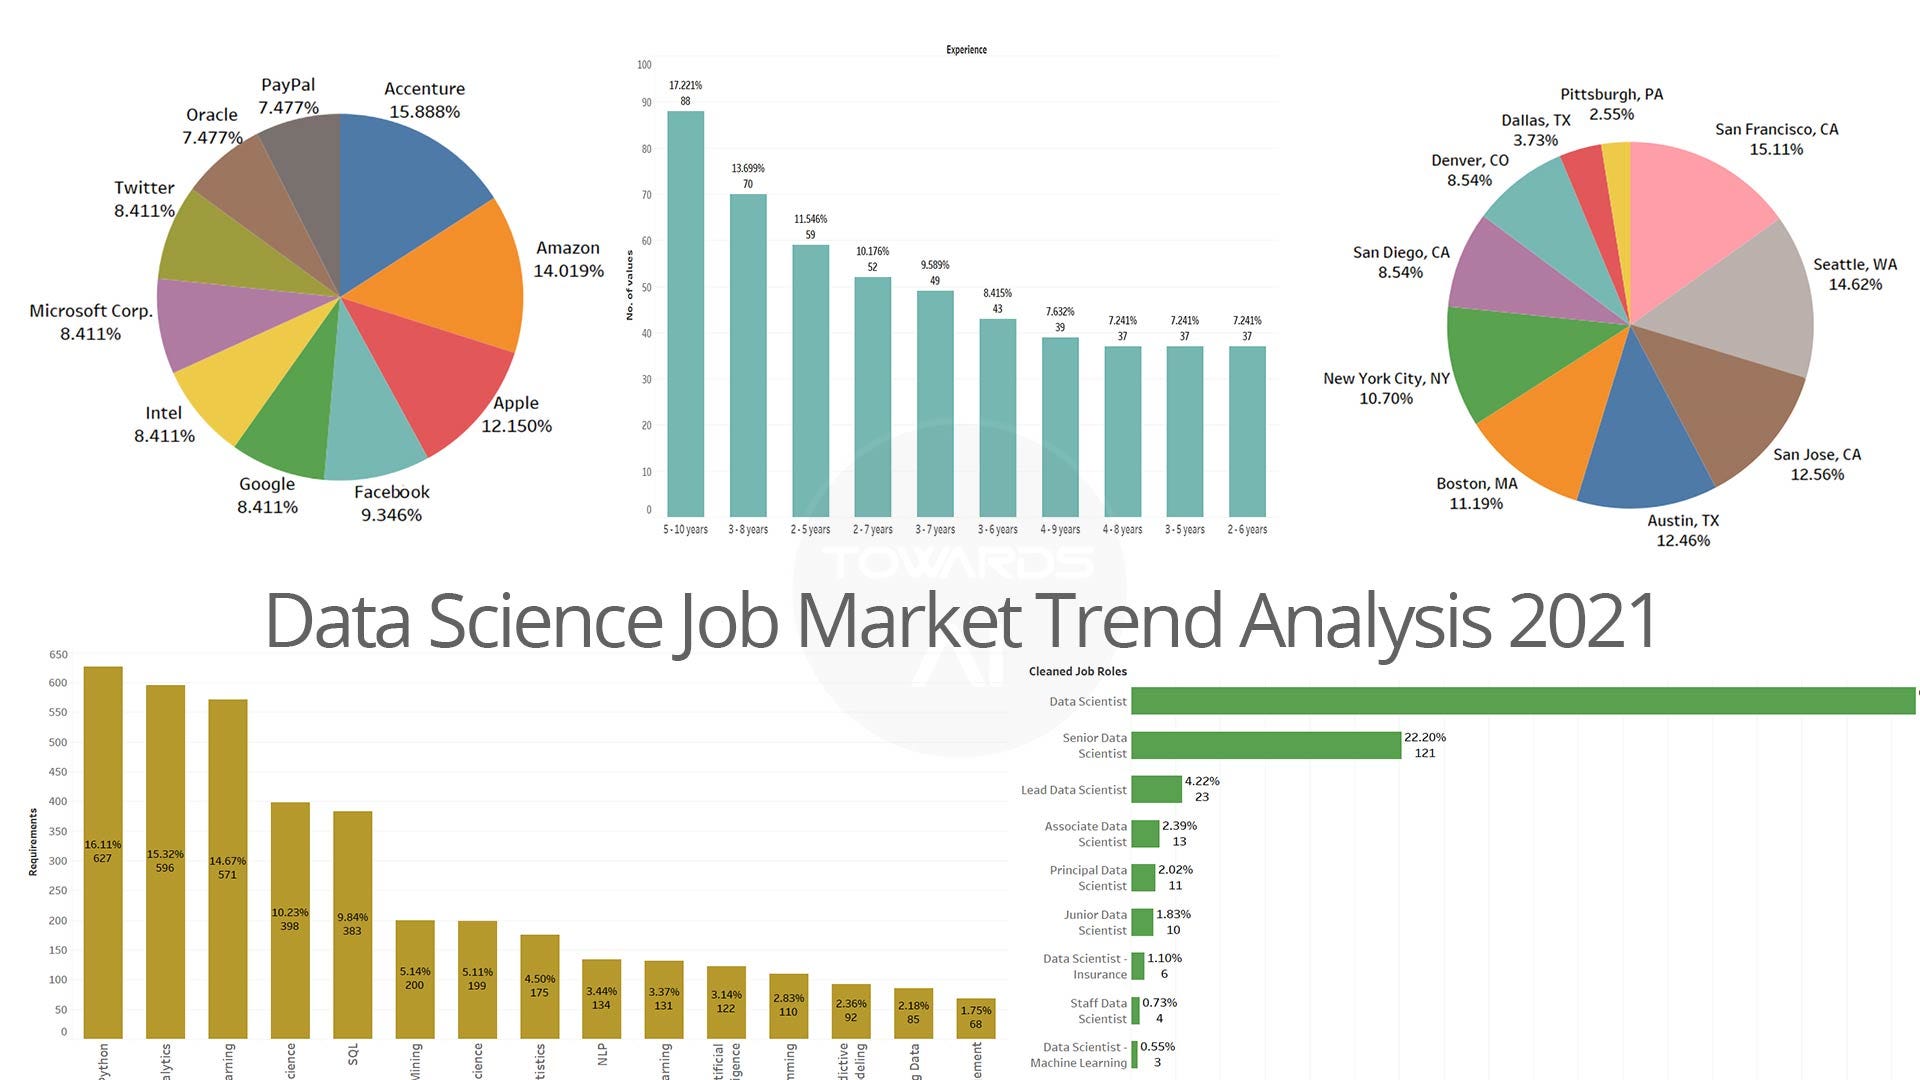 Data Science Job Market Trend Analysis for 2021